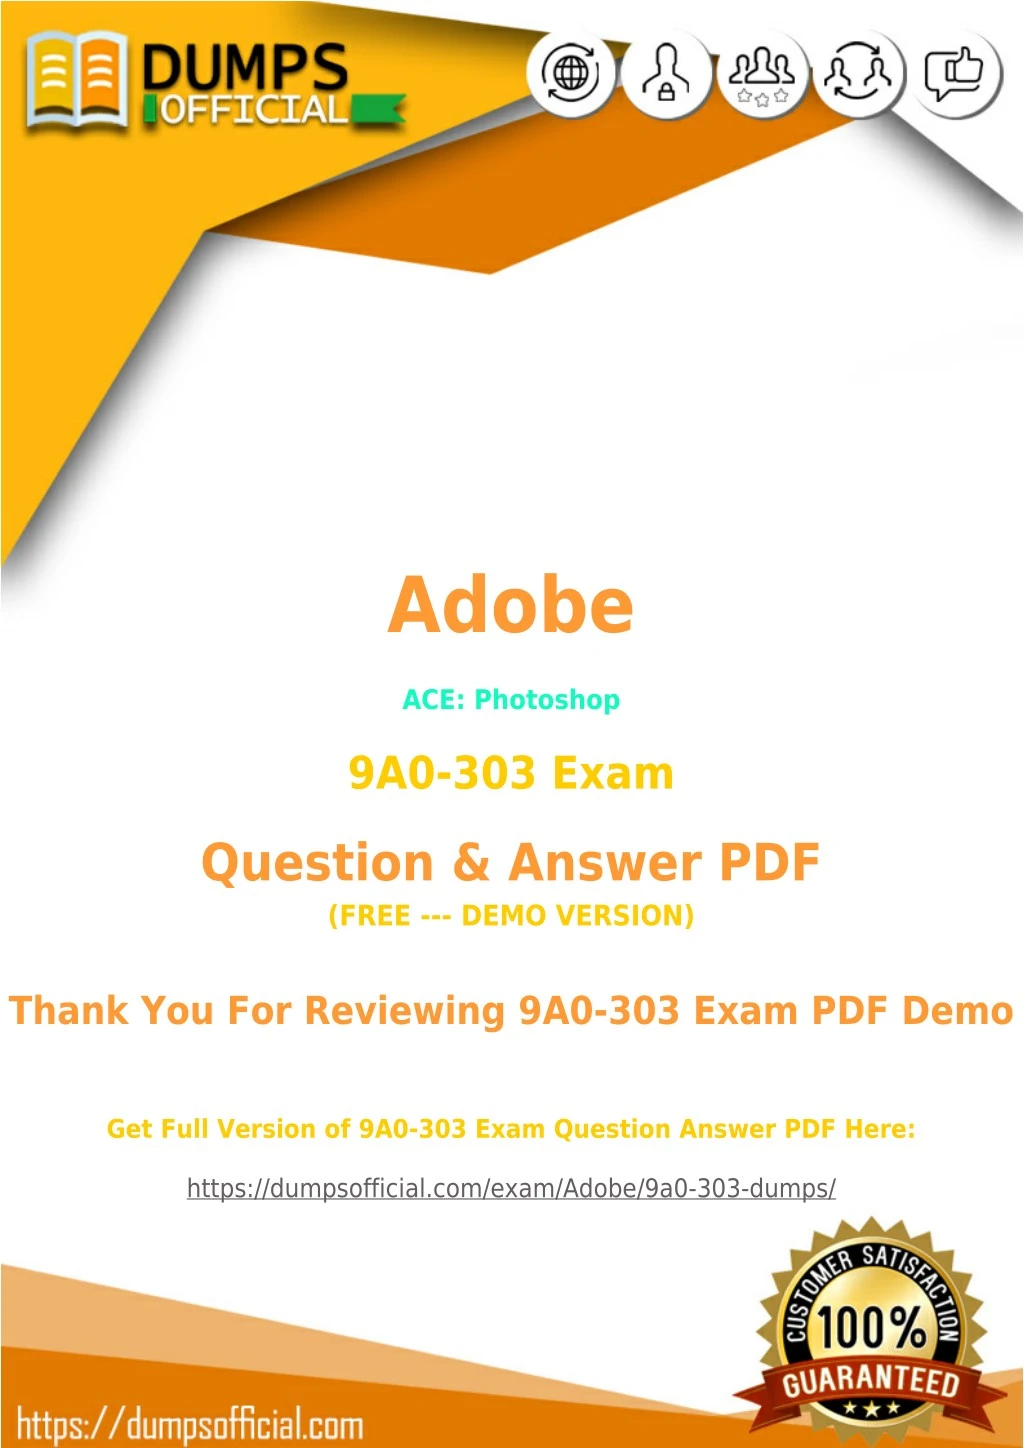 adobe exam questions and answers pdf